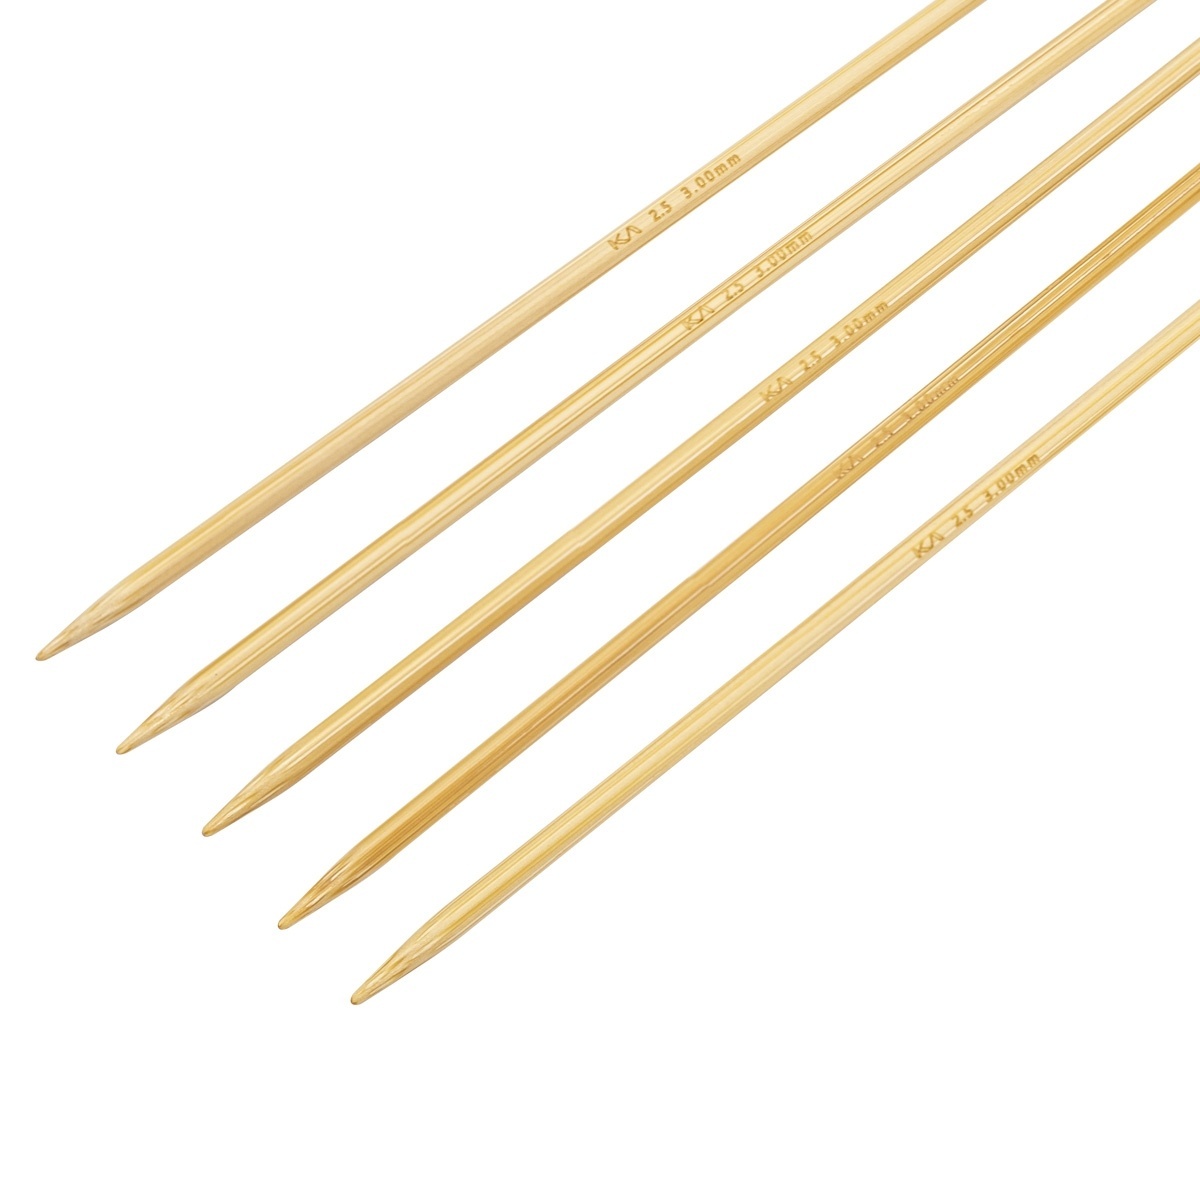 Double-pointed knitting needles, Seeknit, 3.0mm фото 3